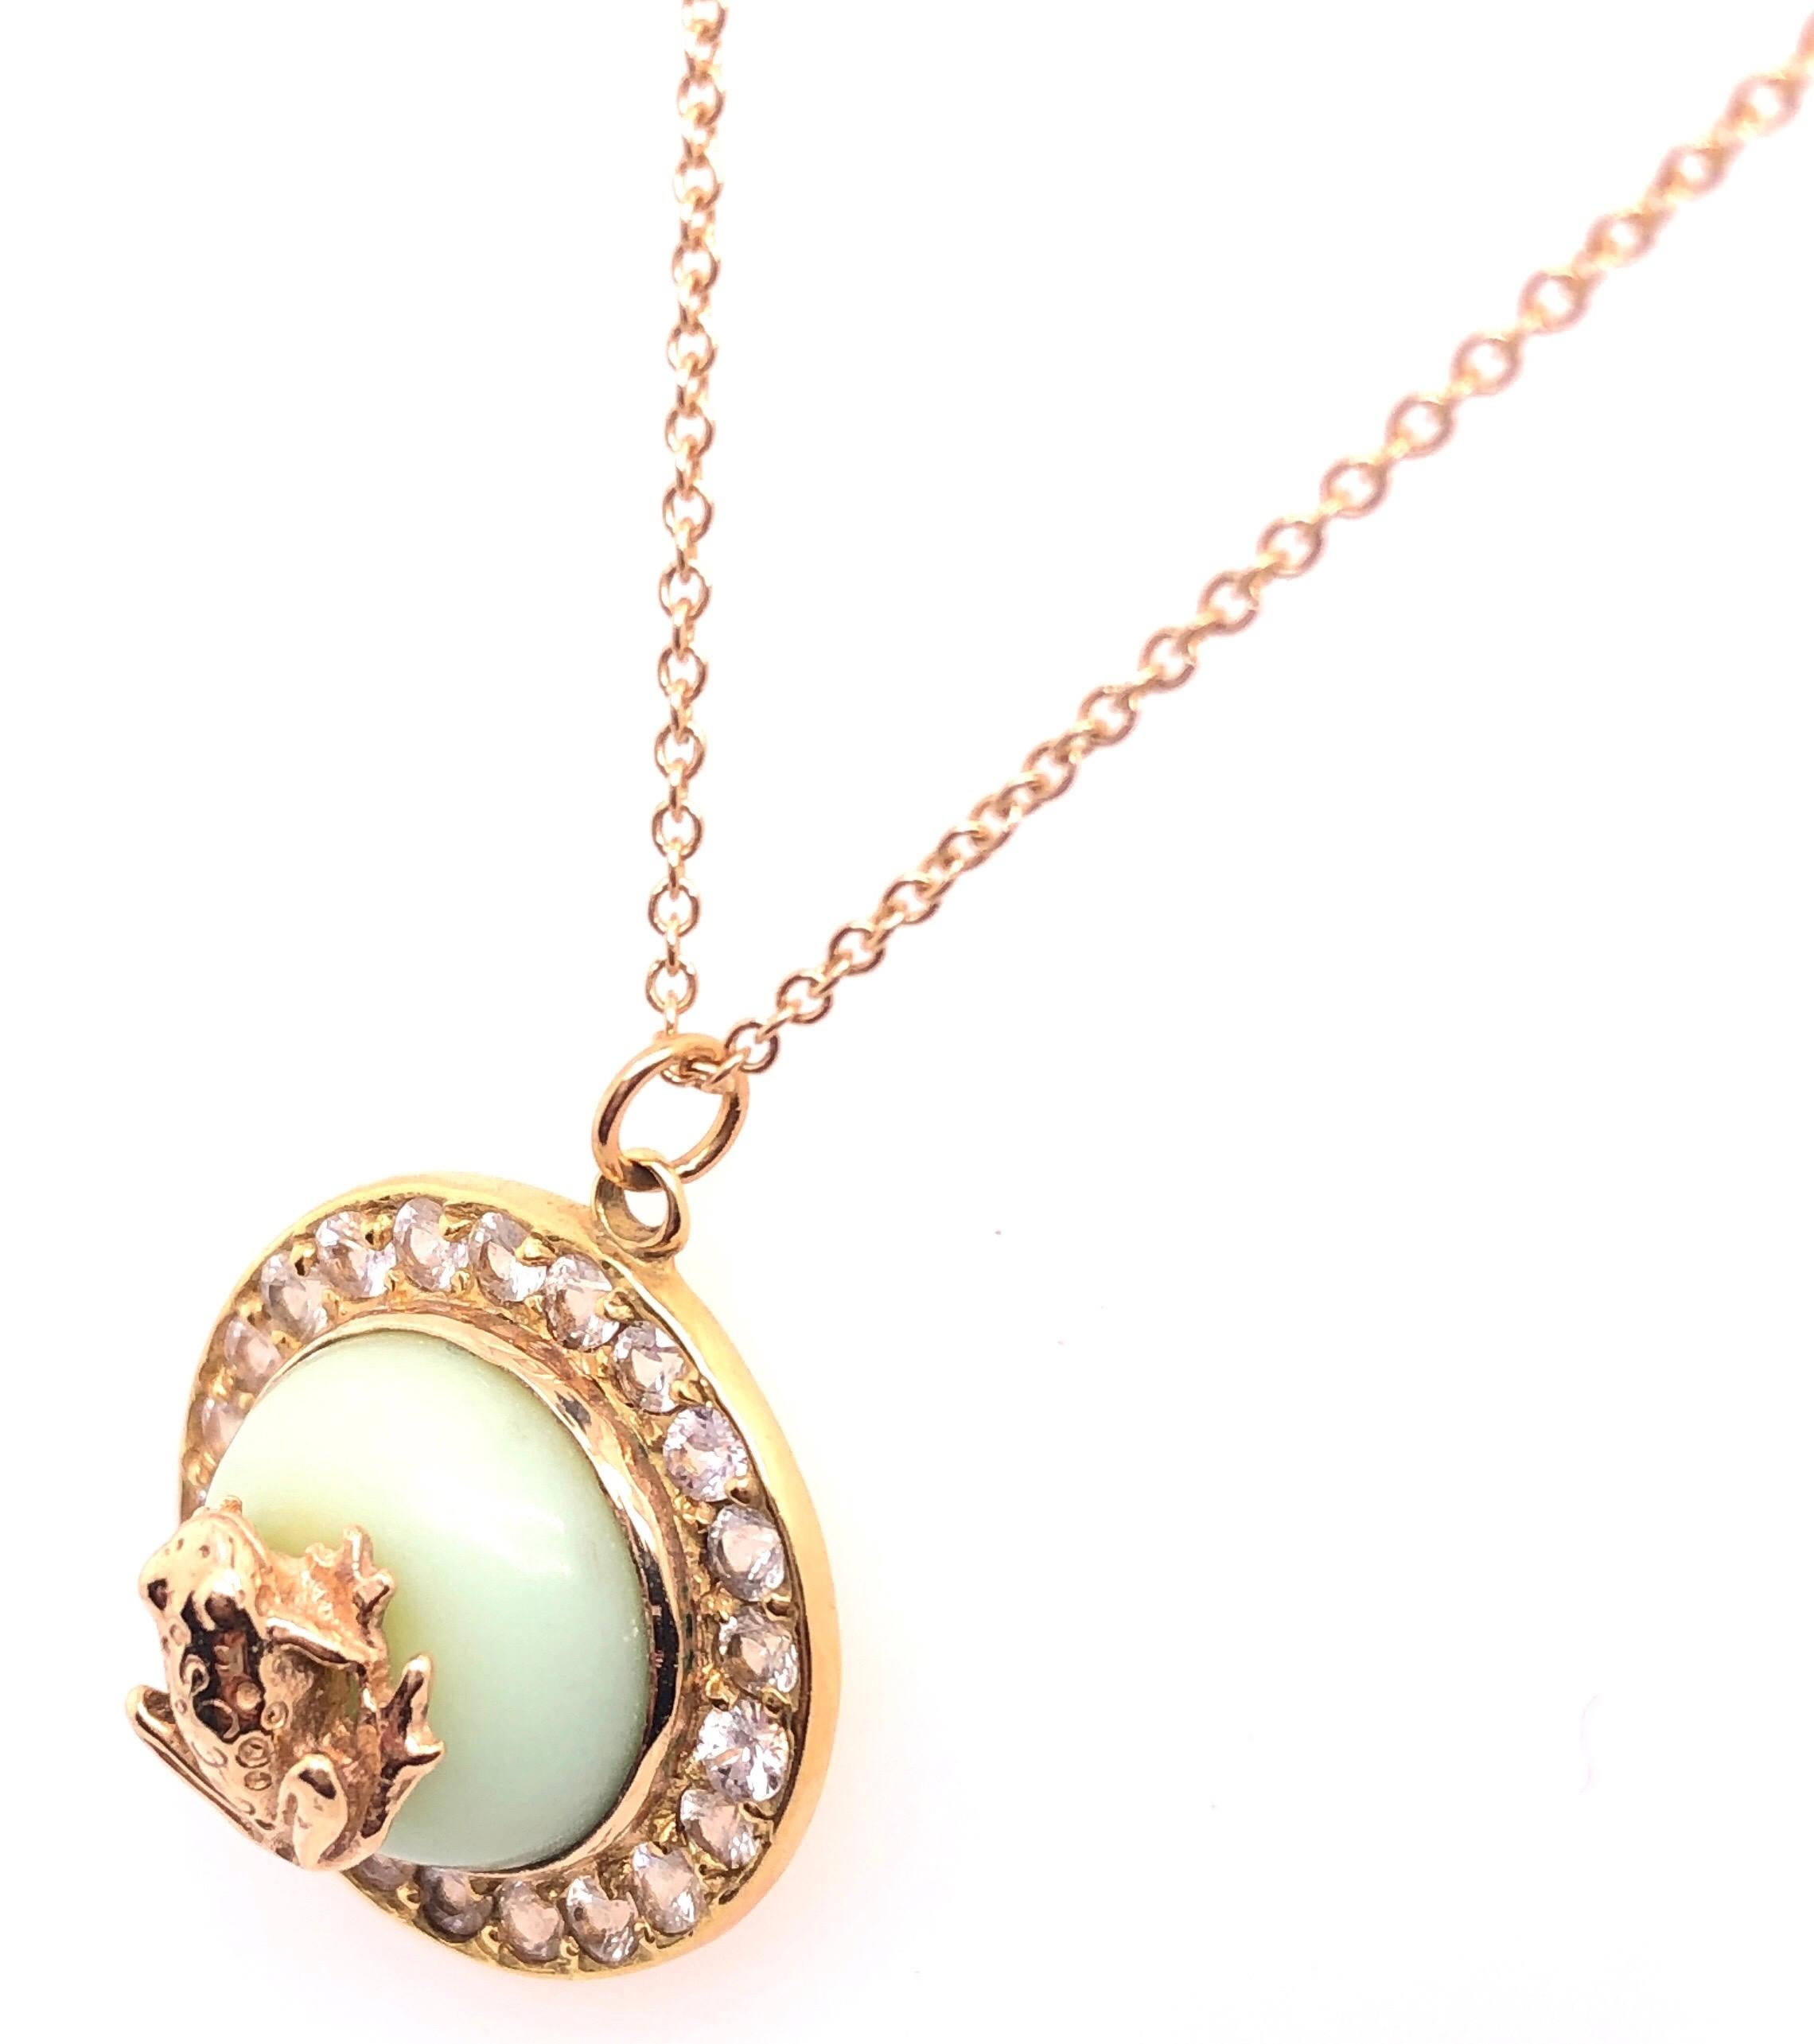 Women's or Men's Gold Necklace Diamond Encrusted Pendant, Center Stone with Gold Frog. 18KT For Sale